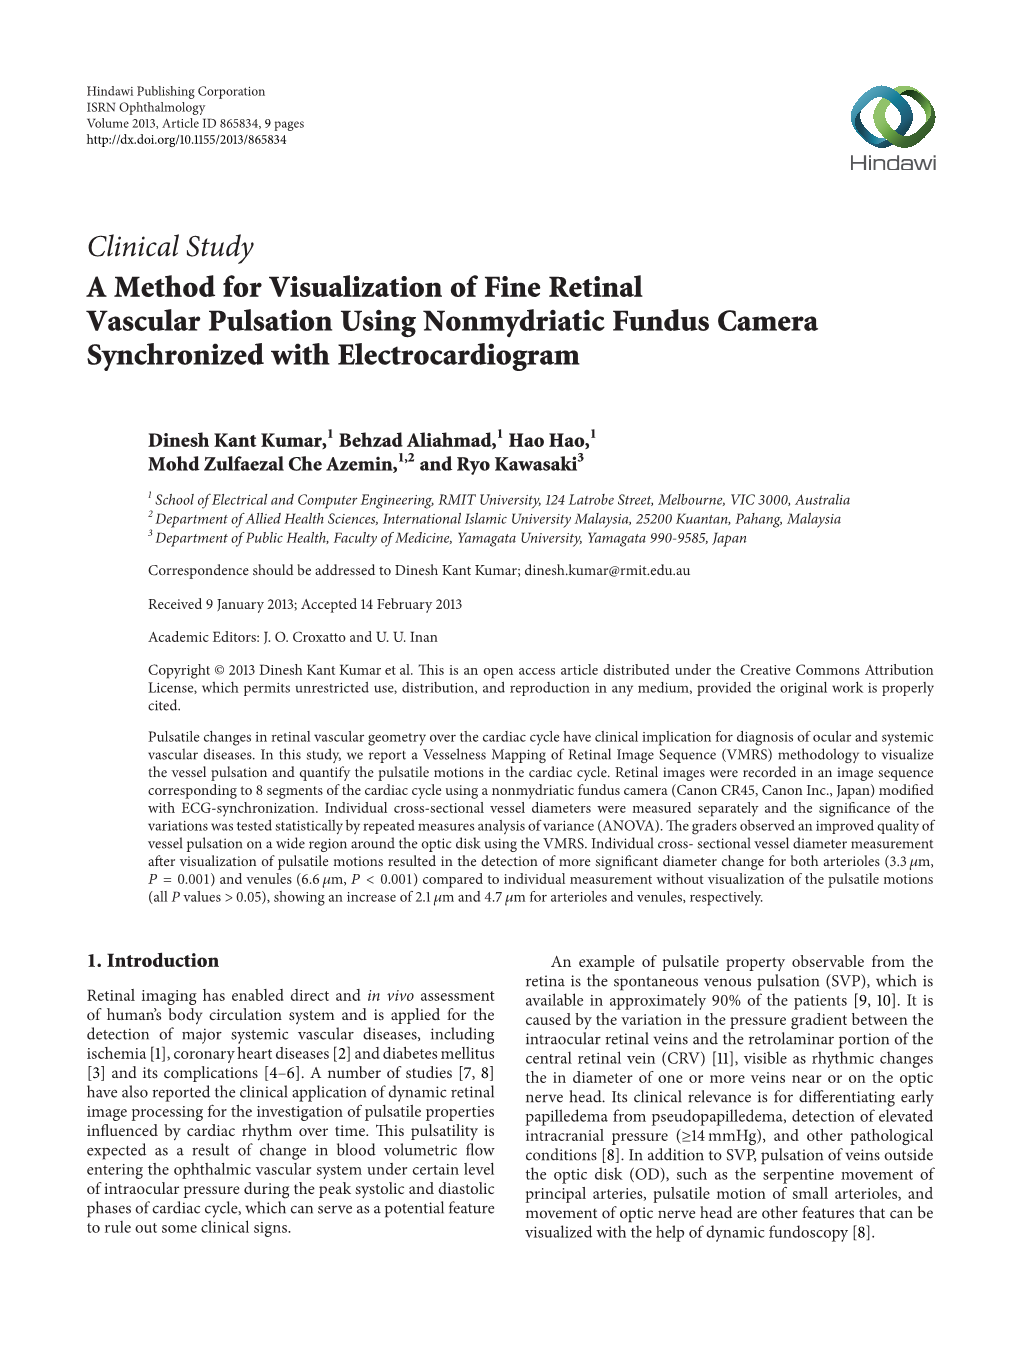 A Method for Visualization of Fine Retinal Vascular Pulsation Using Nonmydriatic Fundus Camera Synchronized with Electrocardiogram